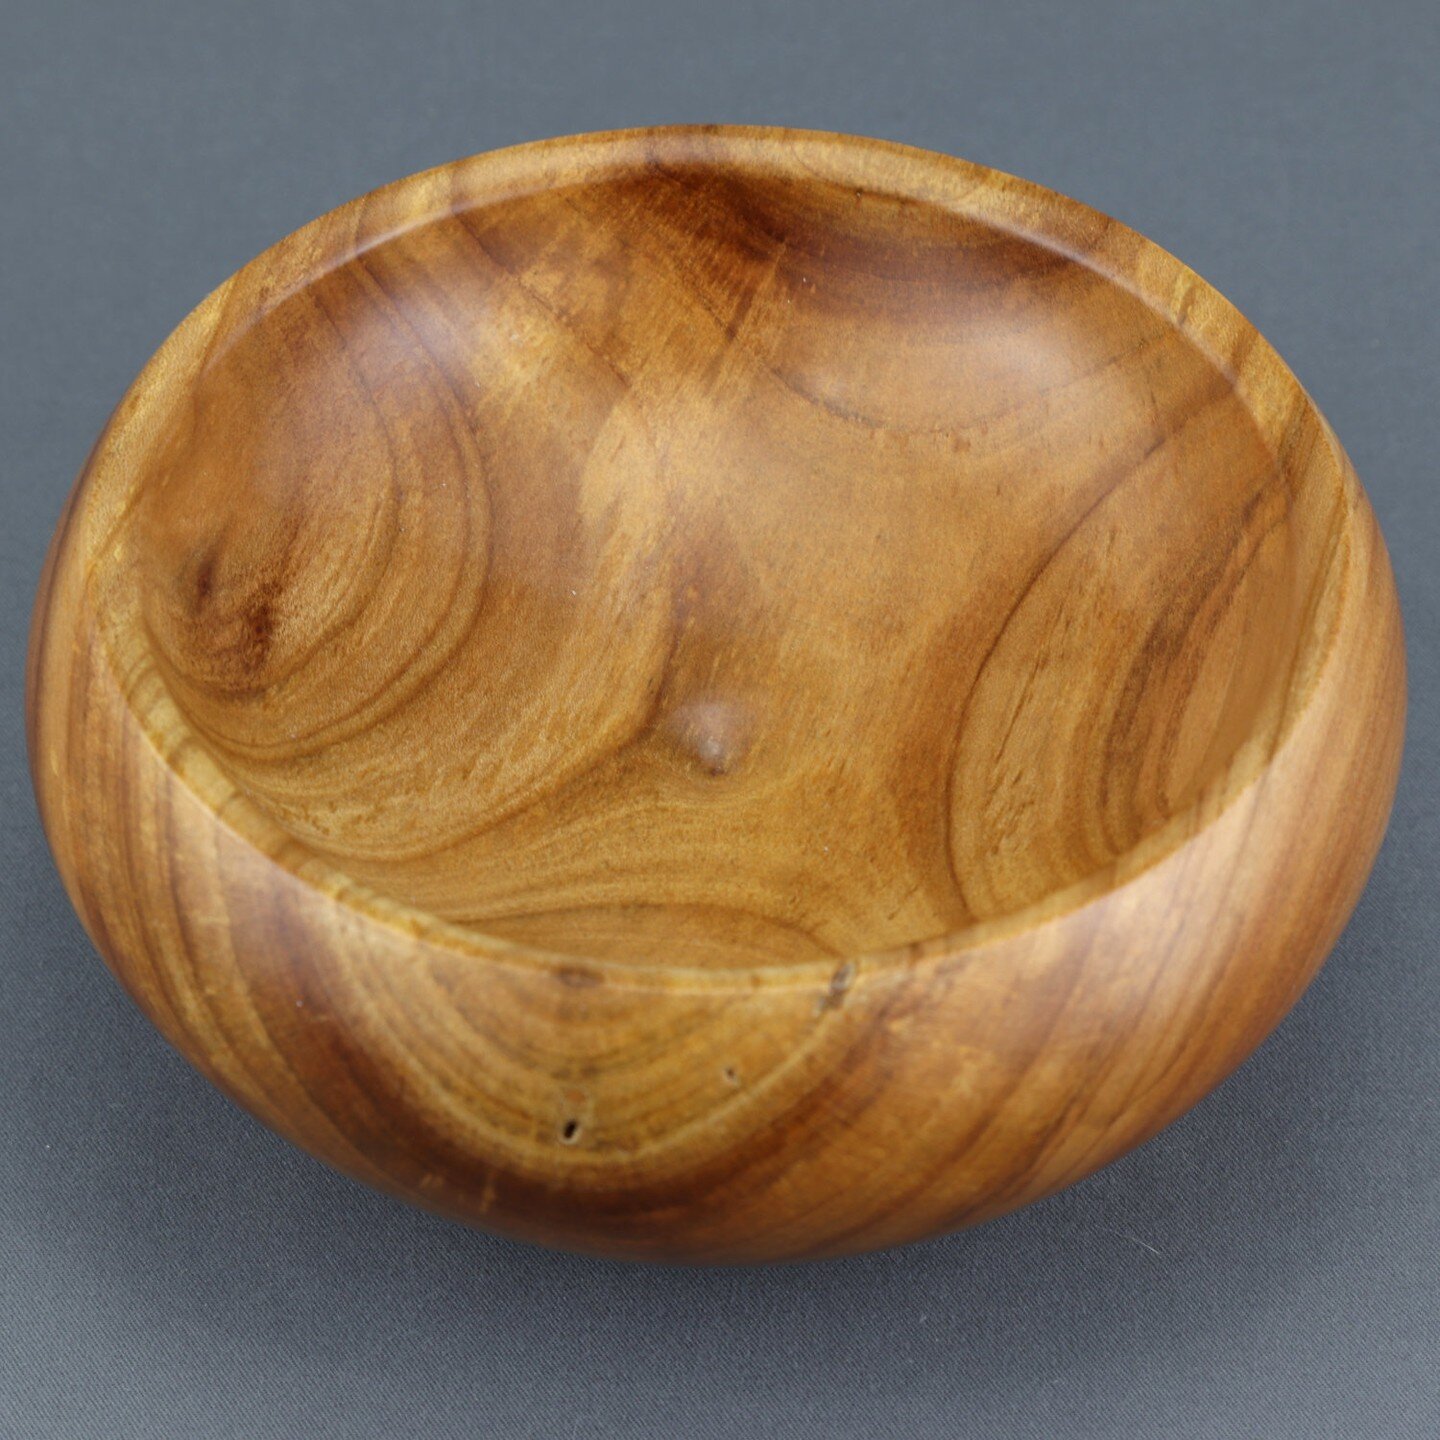 Unique Cherrywood Spinning Bowl | Support Your Spindle &amp; Enhance Your Craft

#ravelry #yarnspinning #handmade #cherrywood #woodturning #woodturner